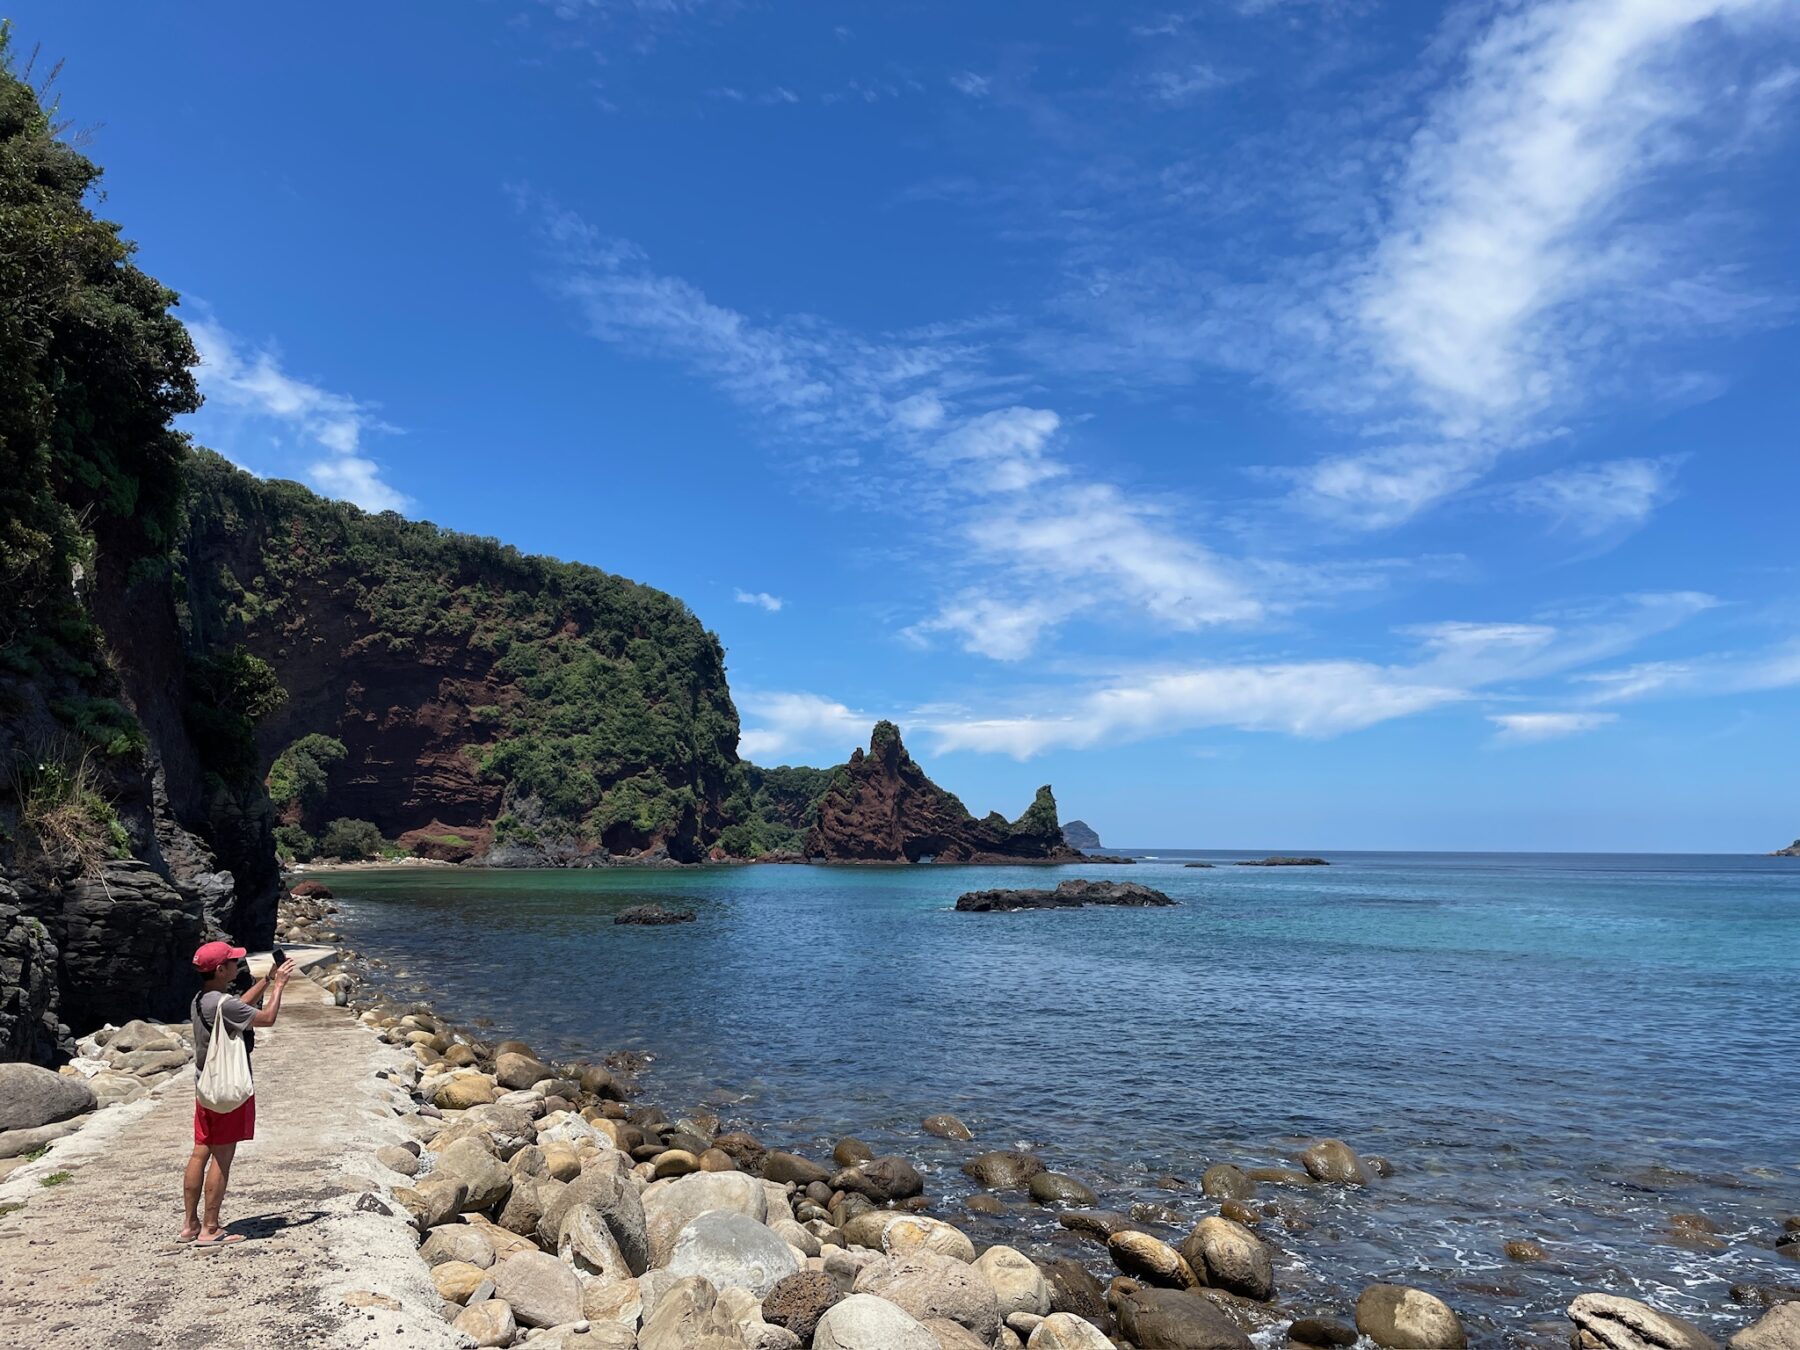 [Why I Travel to Entô] “I can look at the sea to my heart’s content and enjoy that view while having a meal” Entô guest, Mr. Naoyoshi Tsuzuki and Ms. Kaori. The Oki Islands / Sightseeing | Ep.05